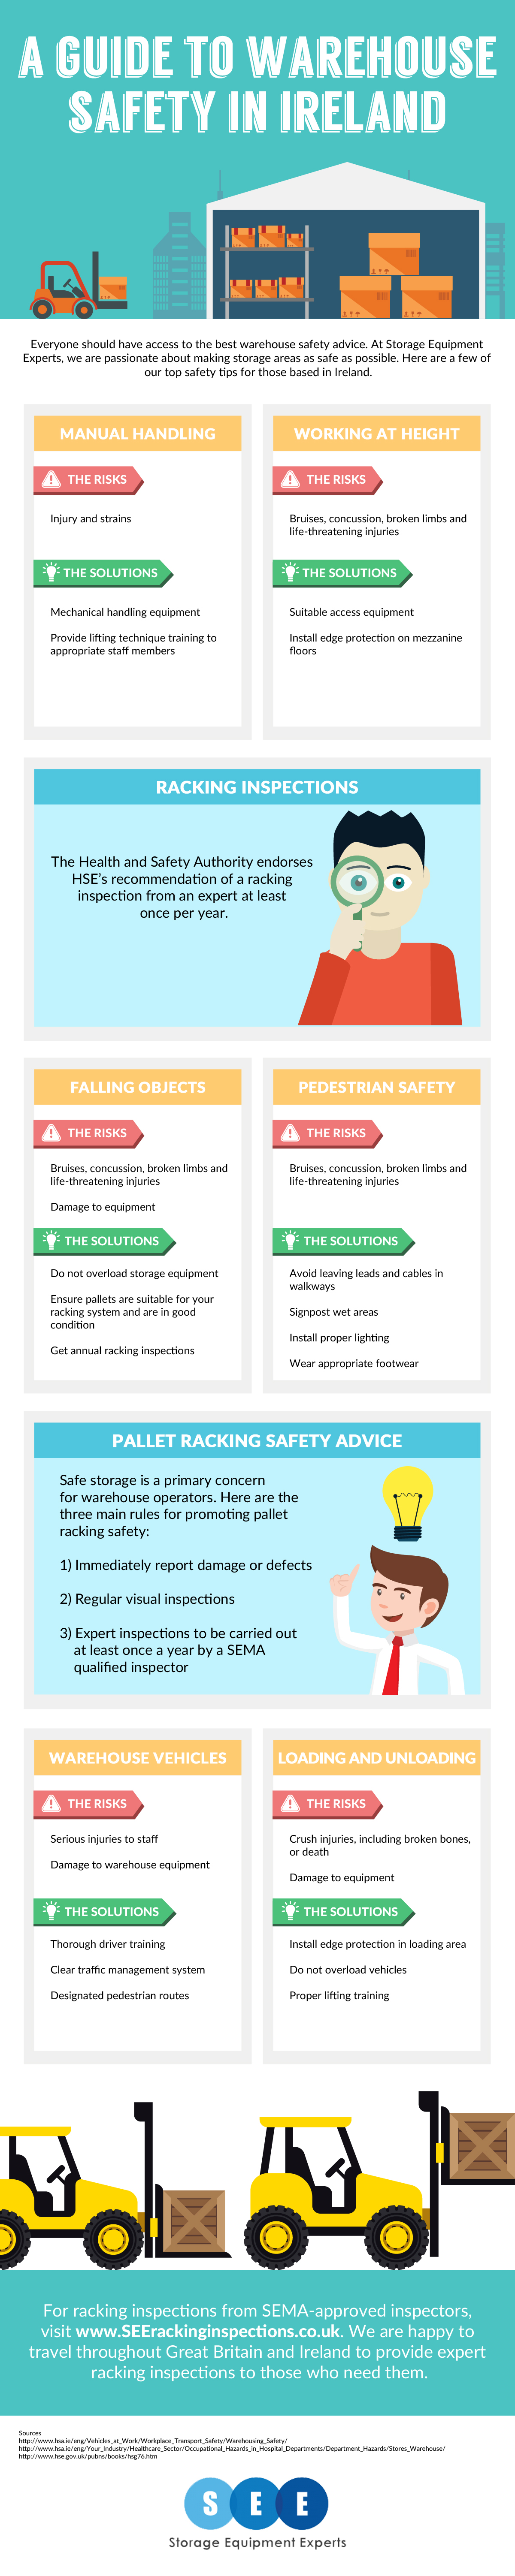 Warehouse safety in Ireland infographic